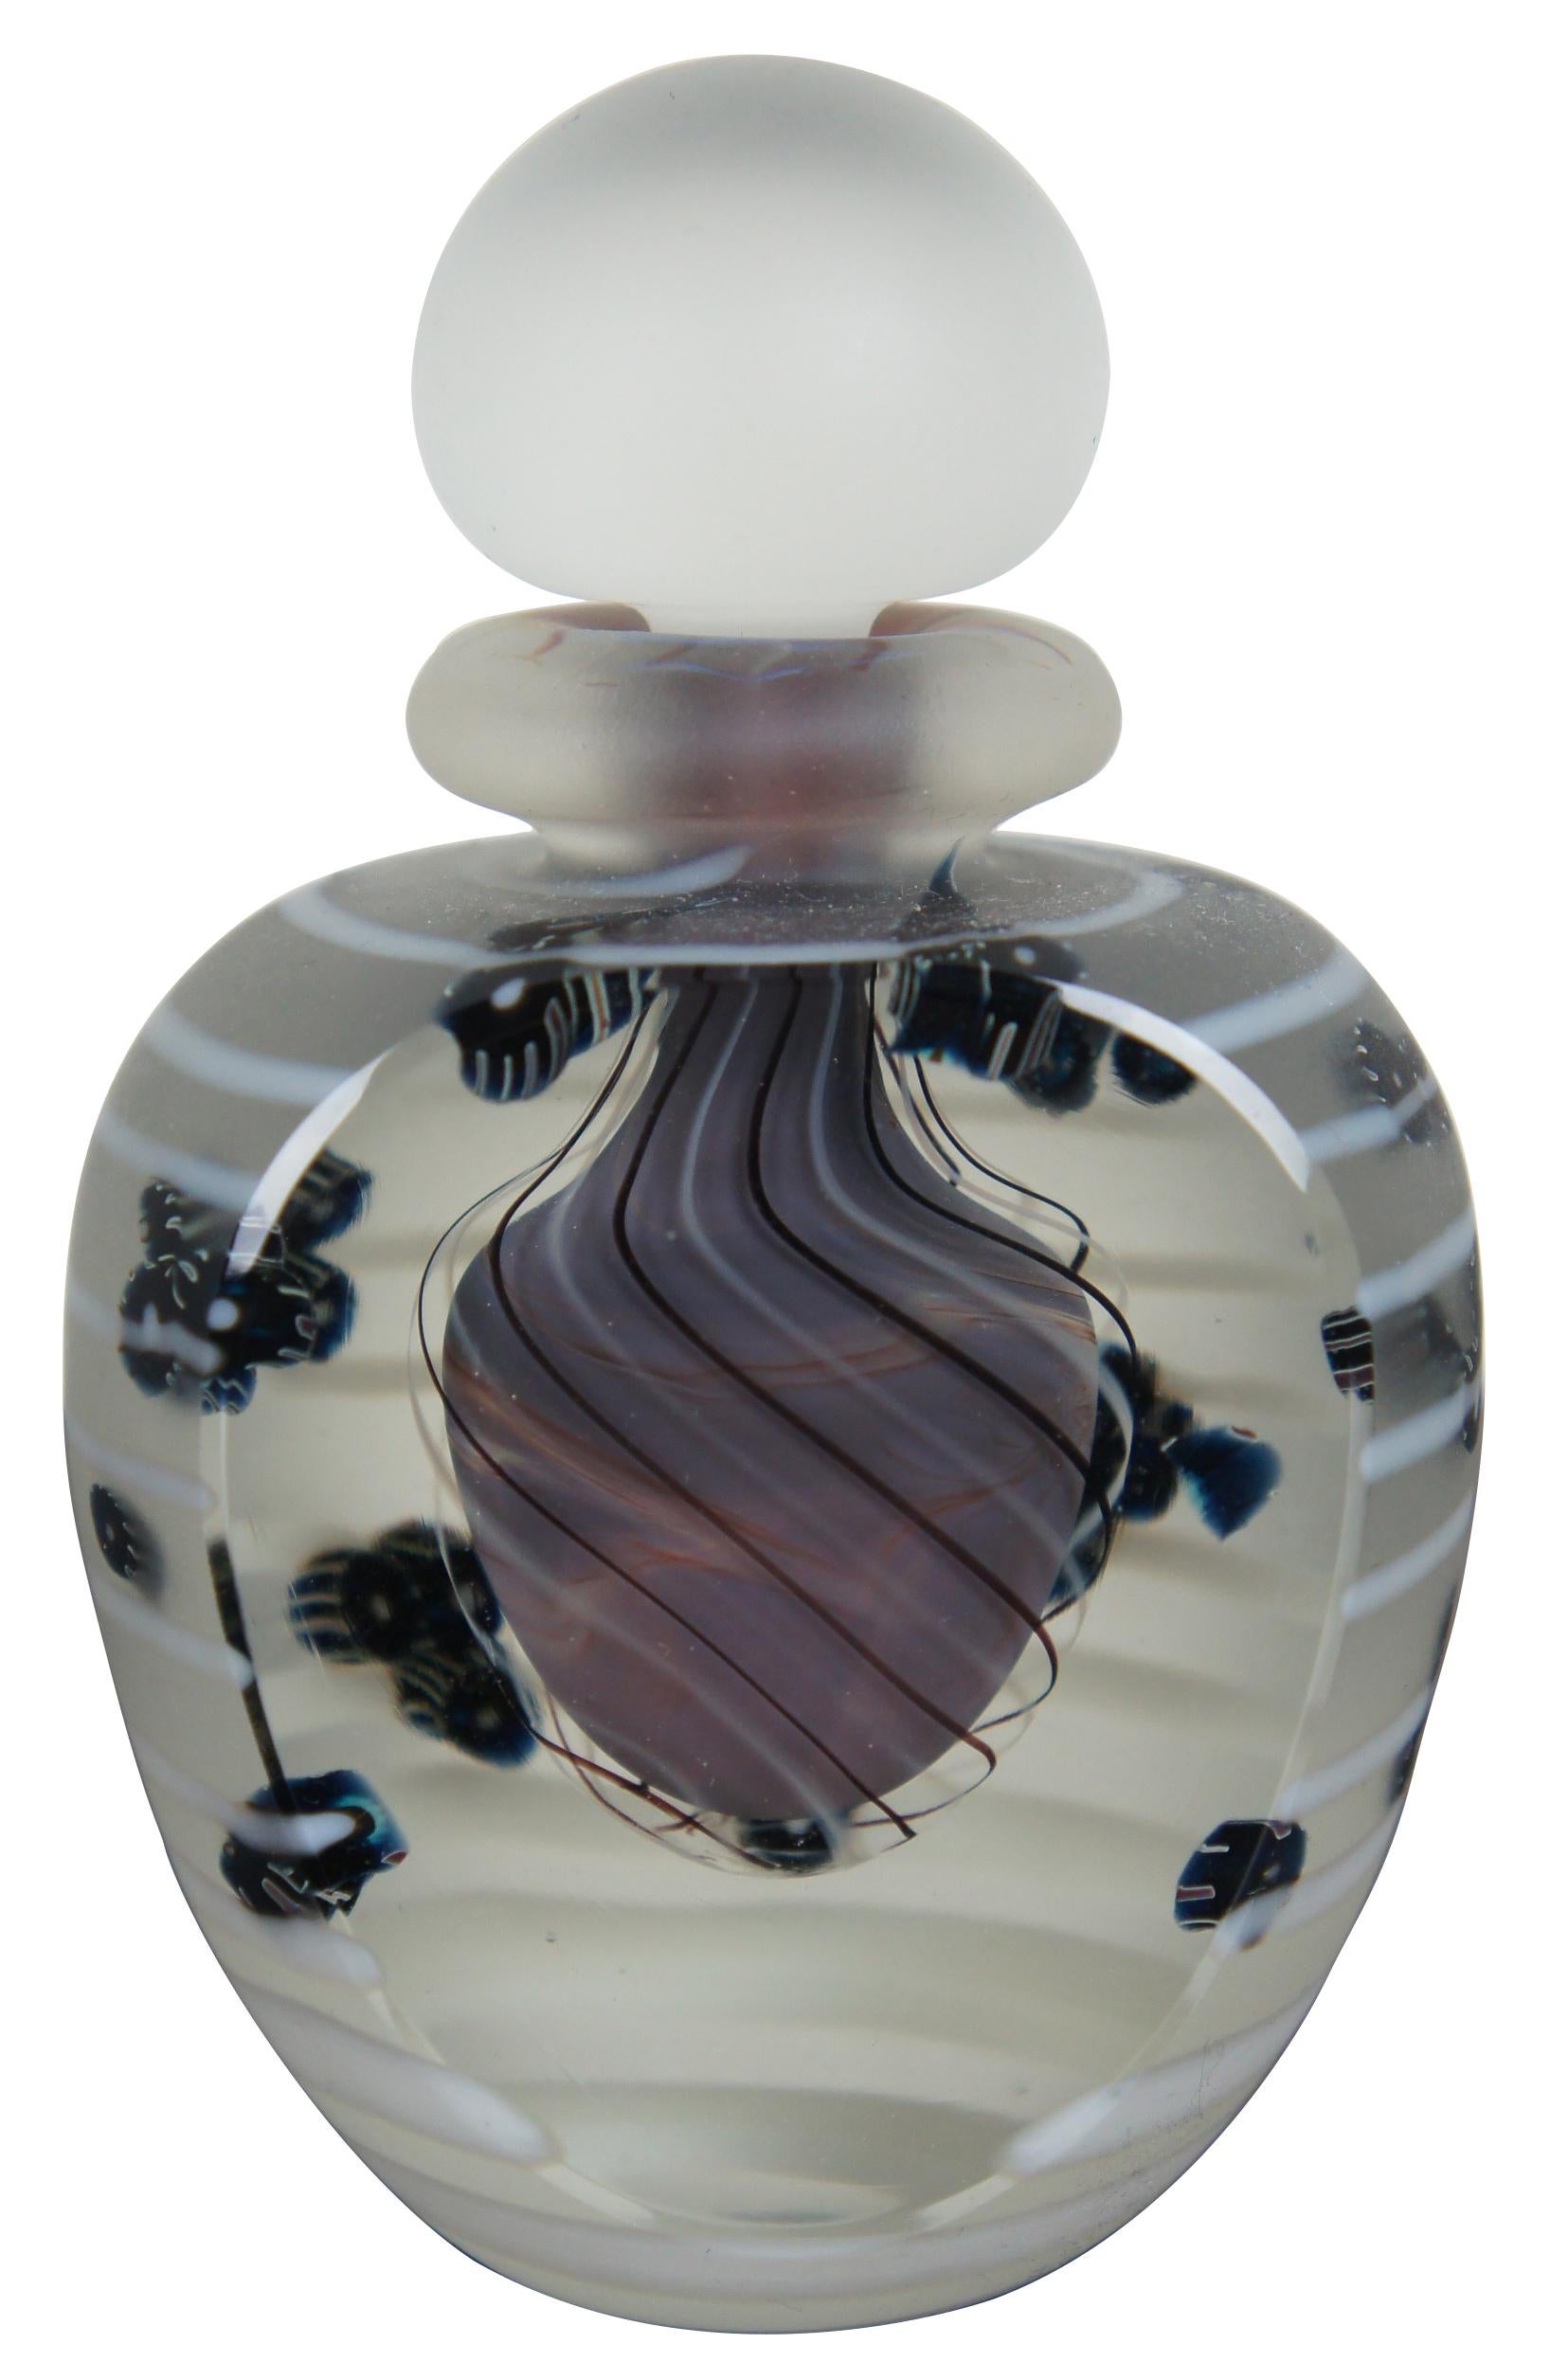 1984 signed art glass perfume bottle and stopper, made of satin glass with white stripes and one flattened crystal clear side showing off suspended black striped beads and a pale purple swirled reservoir. Measure: 5